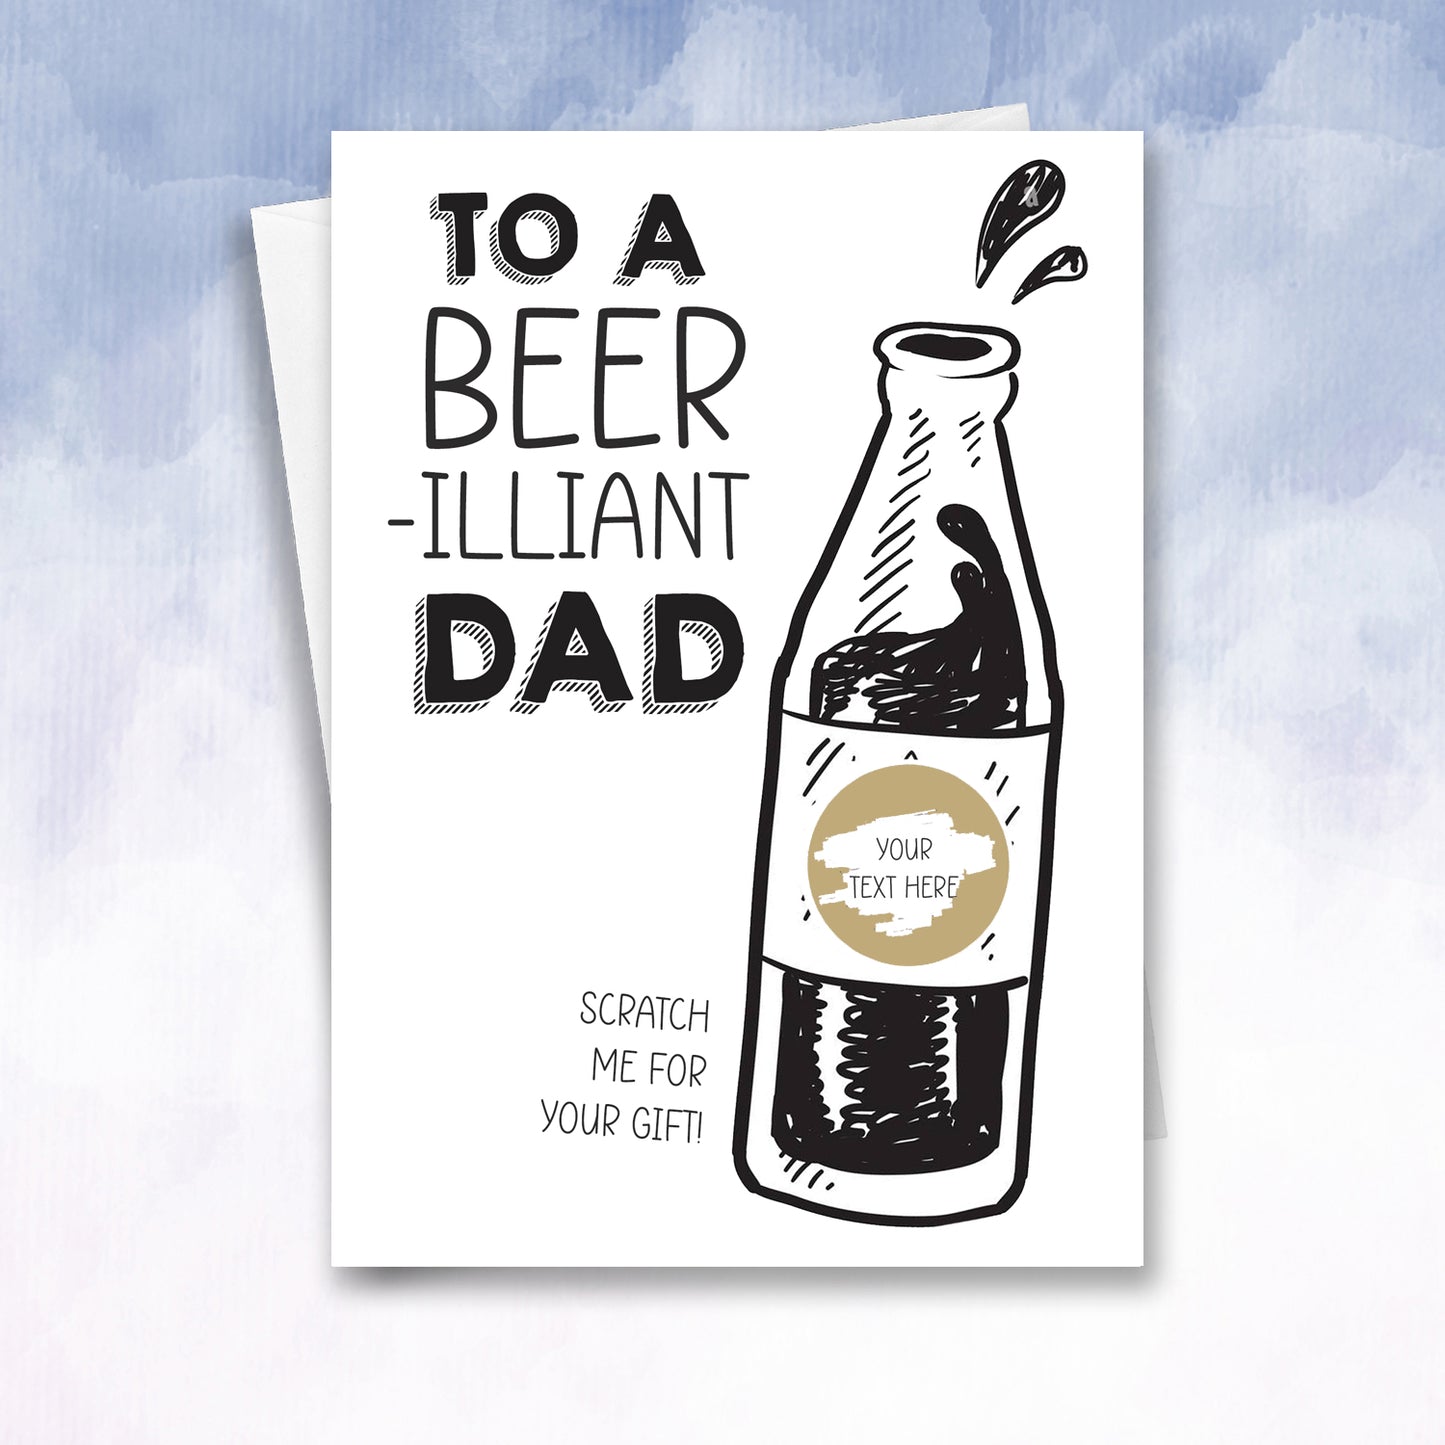 Fathers day scratch off Beer card, you're beerilliant